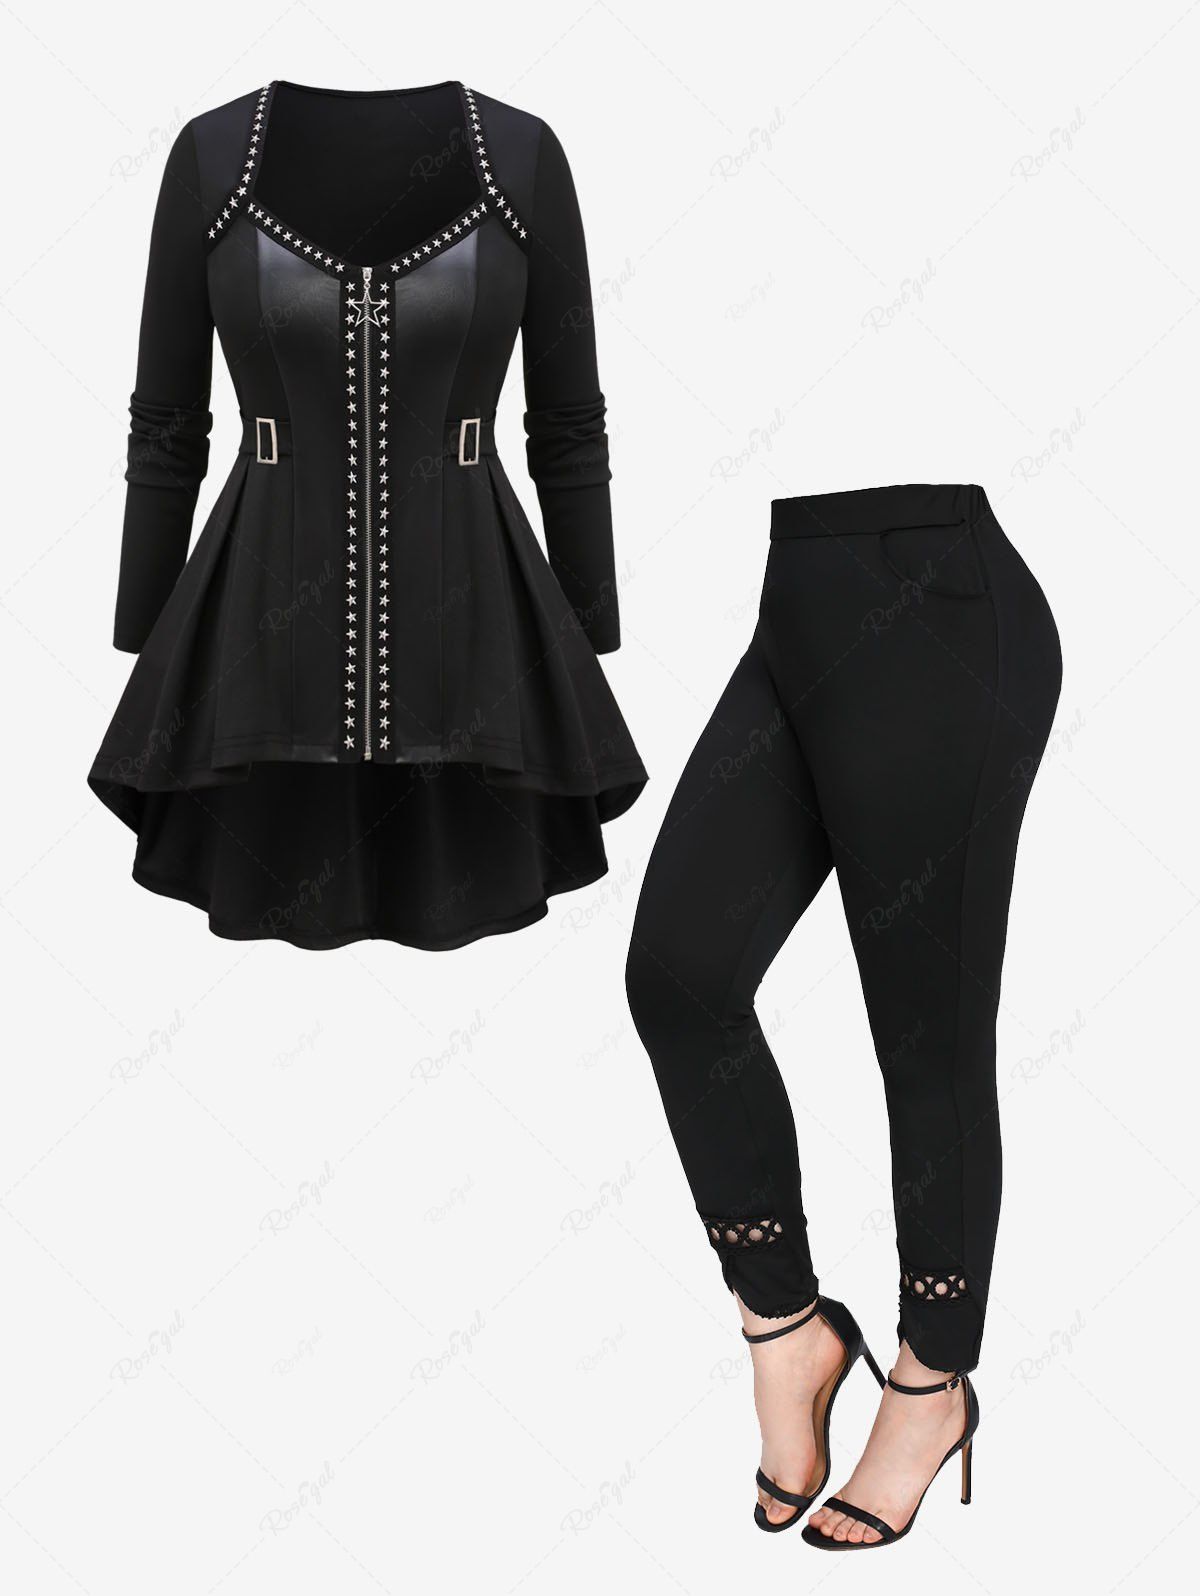 Chic Star Rivet Buckles Zipper PU Leather Patchwork Coat and Hollow Out Lace Trim Pockets Leggings Plus Size Outfit  